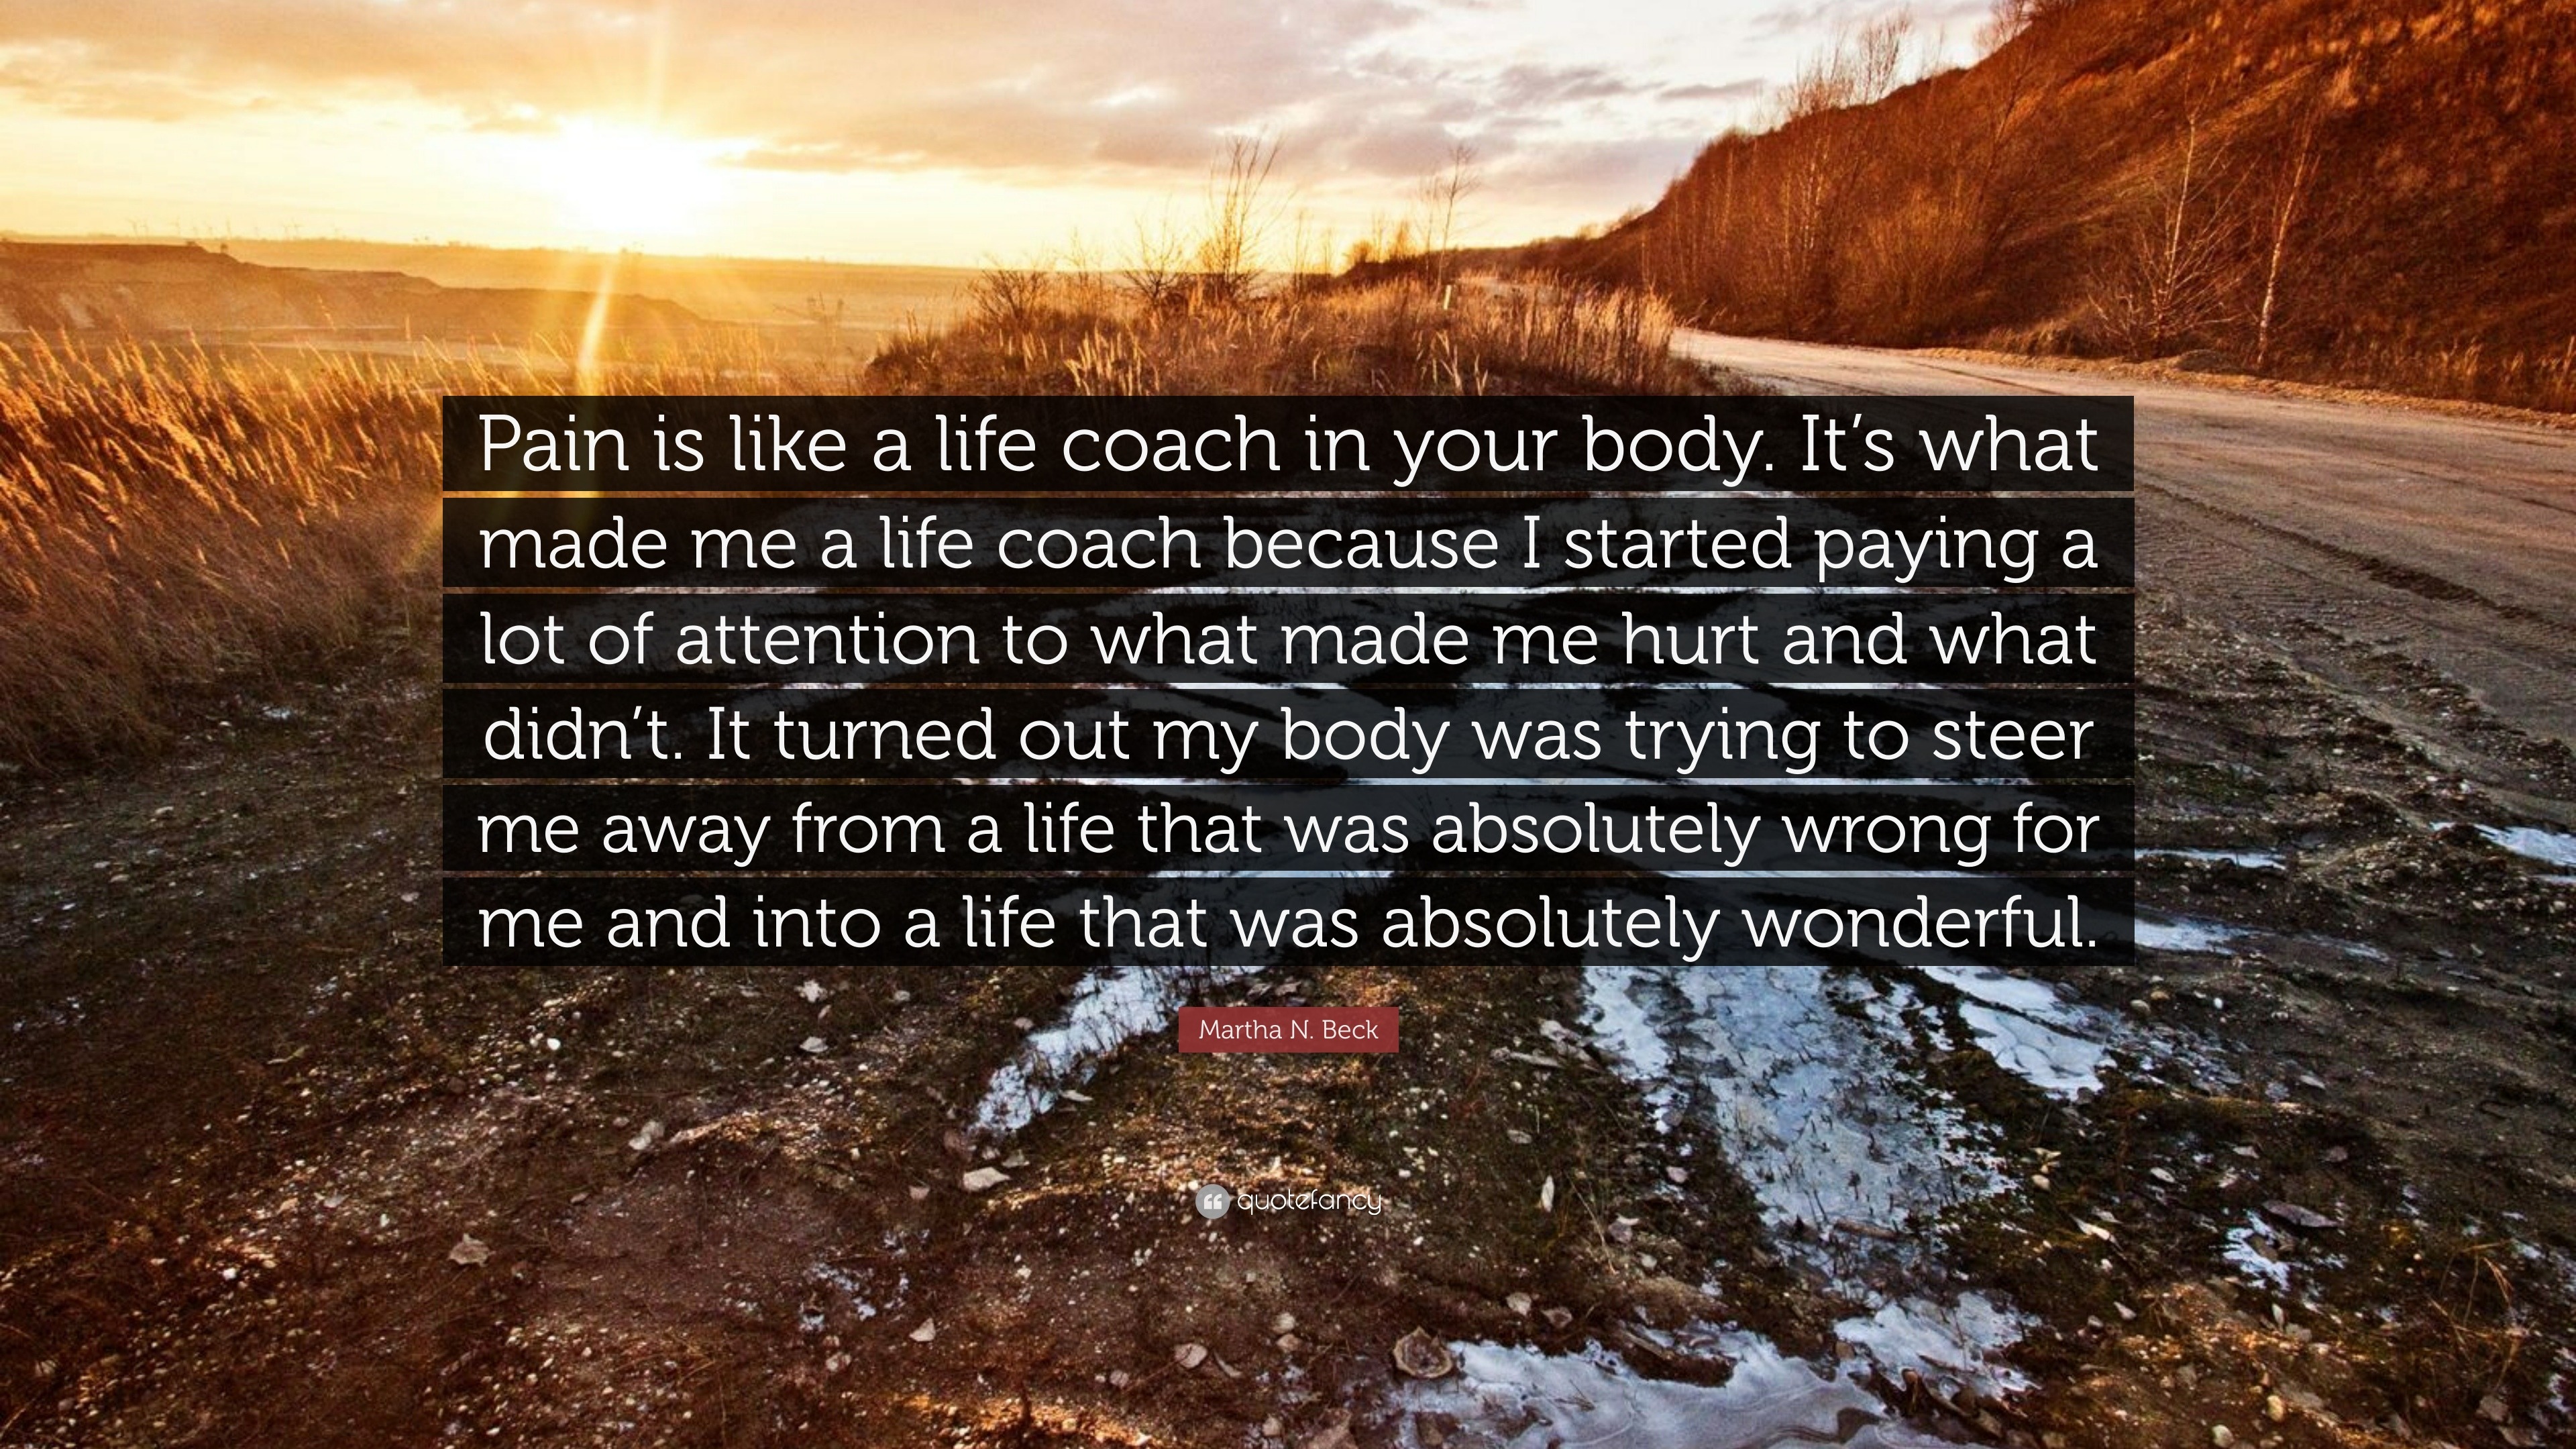 Martha N. Beck Quote: “Pain is like a life coach in your body. It's what  made me a life coach because I started paying a lot of attention to wh...”